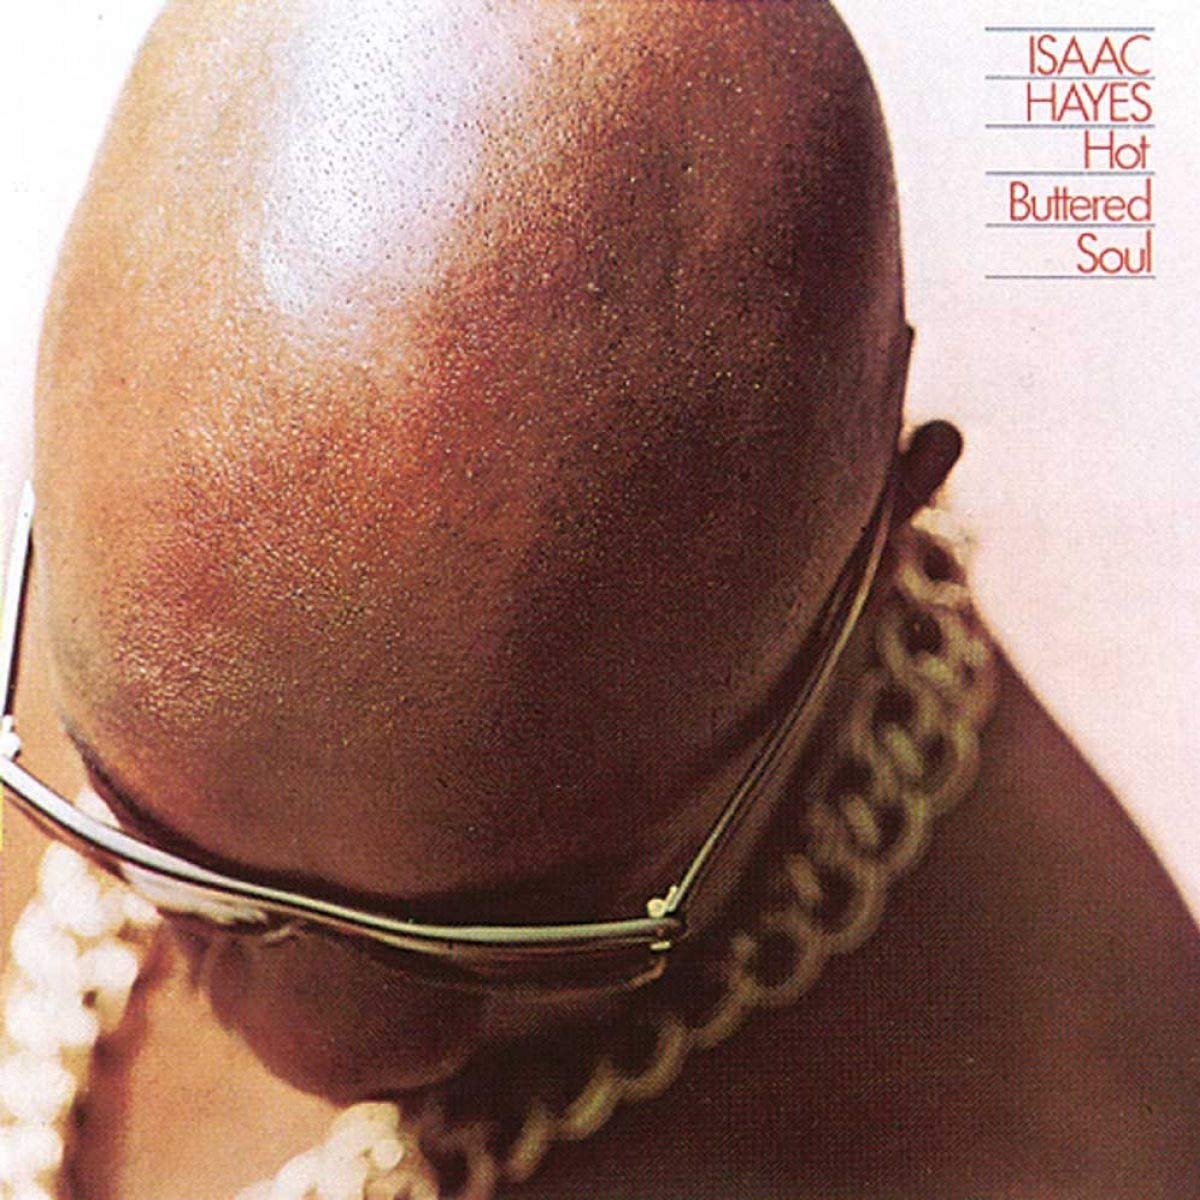 Isaac Hayes, Hot Buttered Soul (EU Version), CD